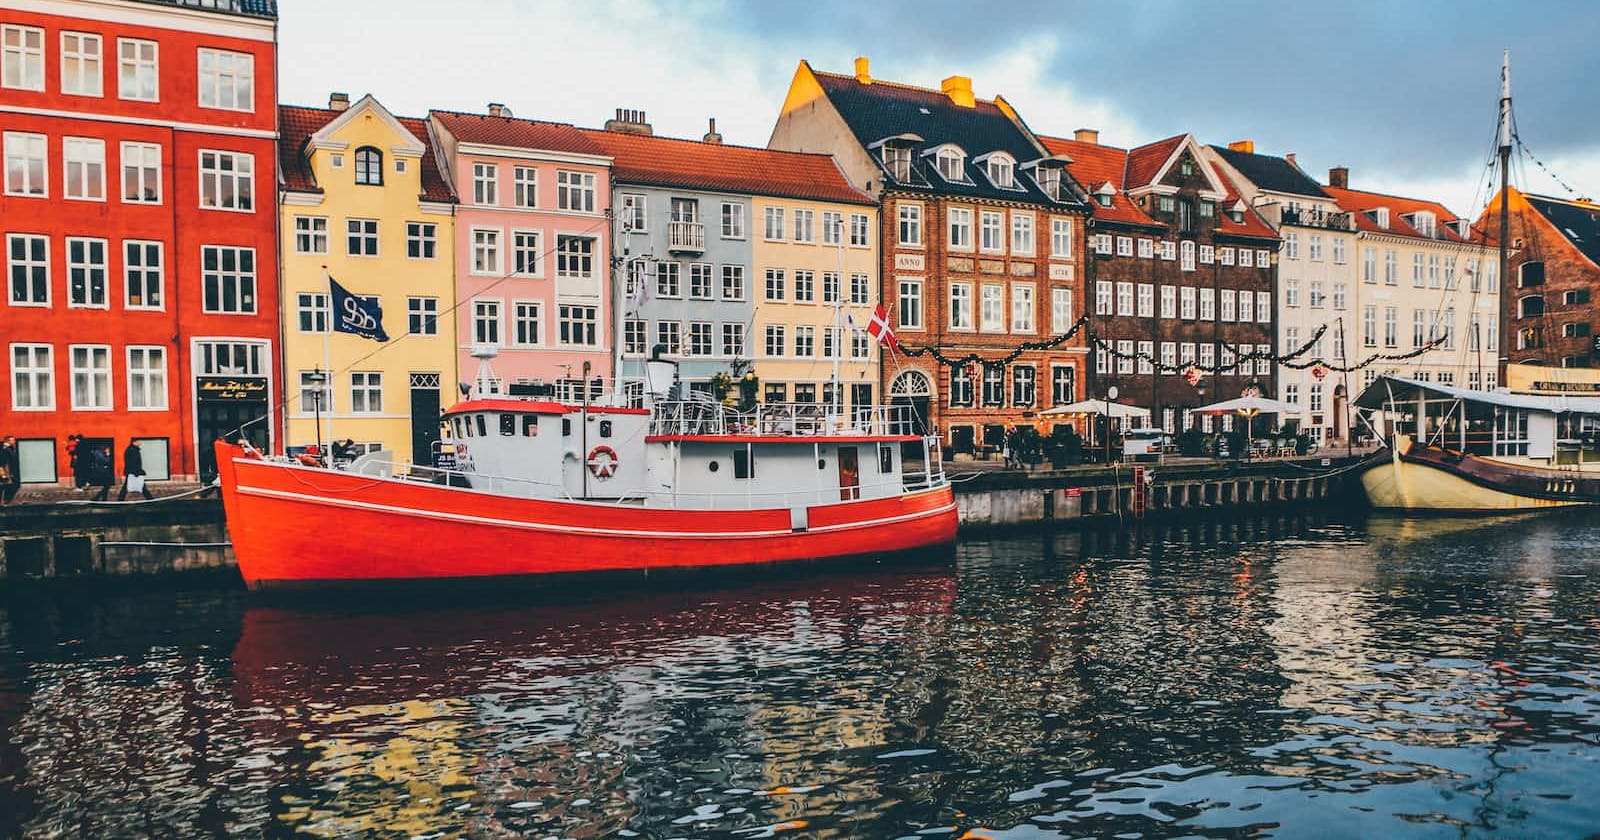 Discovering Denmark: A Happy Place to Work and Live